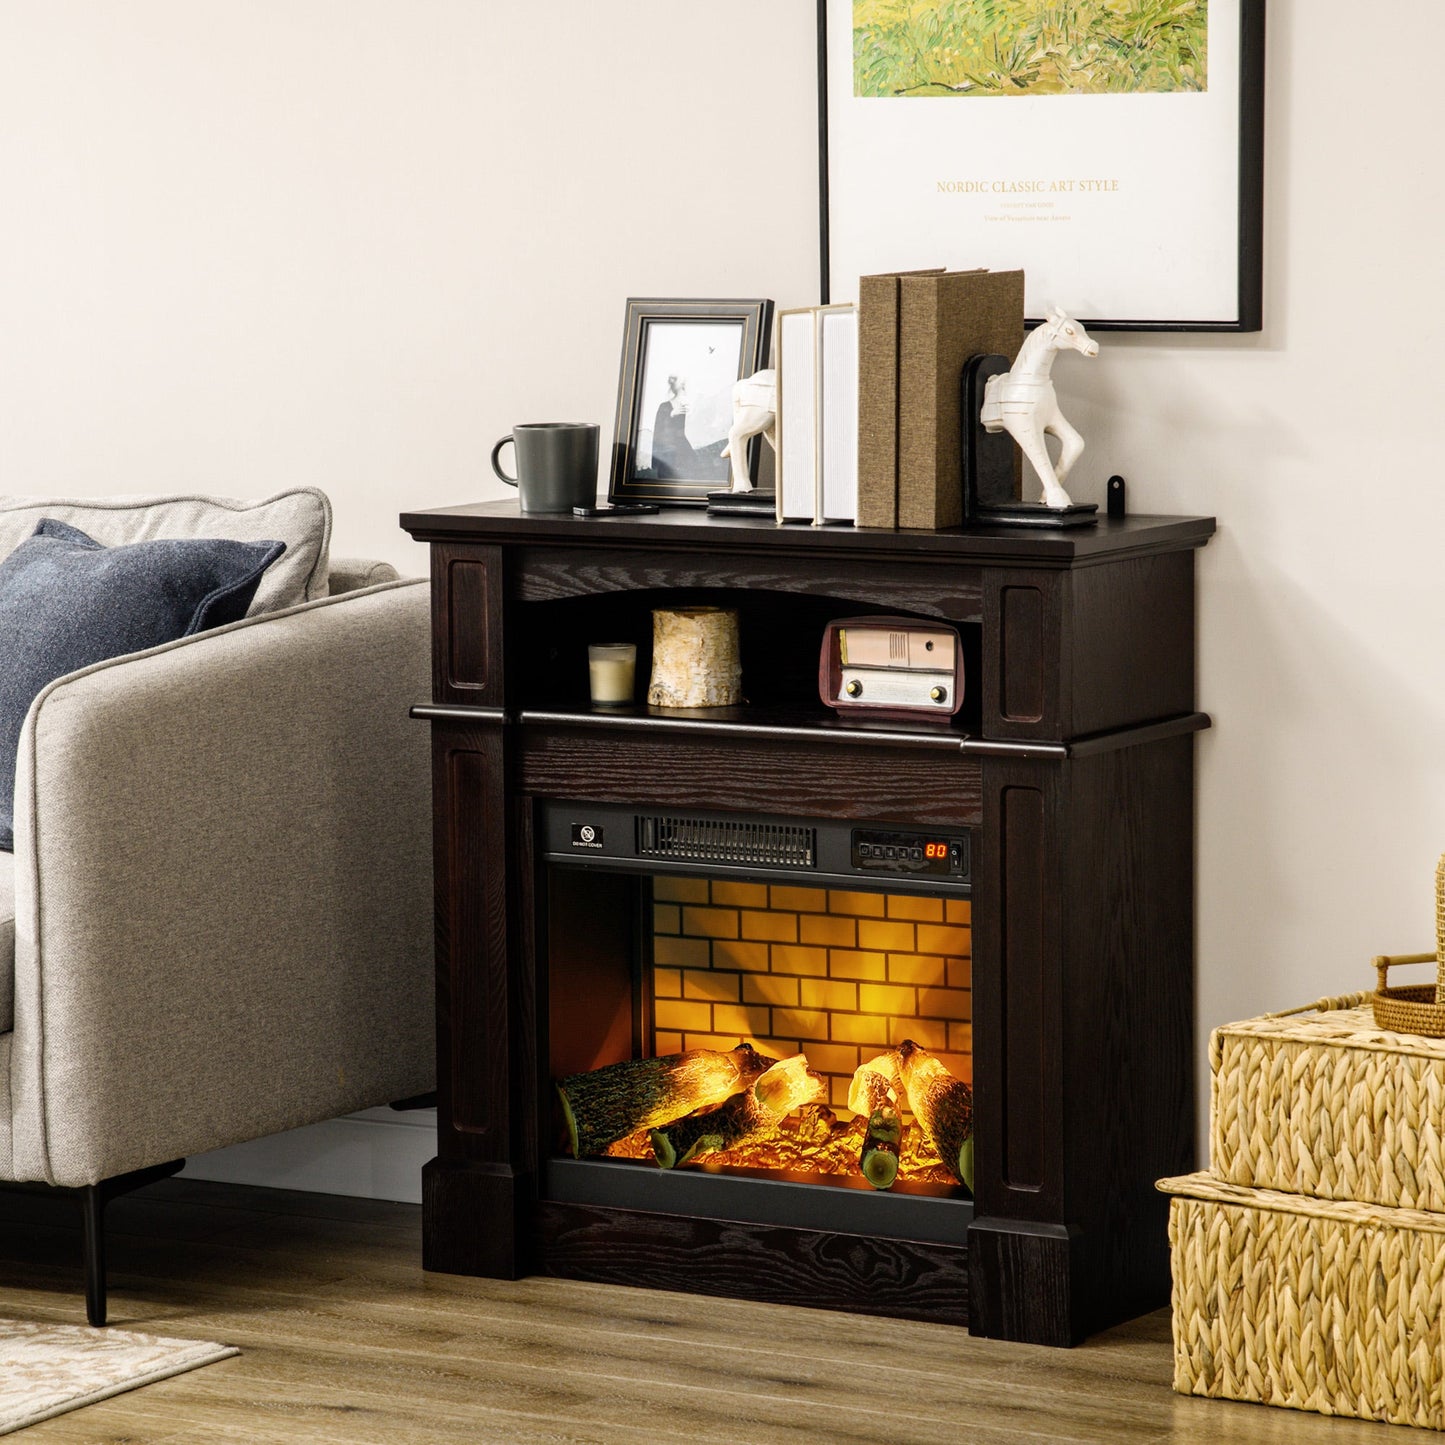 Miscellaneous-Free Standing Electric Fireplace with Mantel, Freestanding Electric Fireplace Heater with Logs Hearth, Shelf and Remote Control, 1400W, Brown - Outdoor Style Company